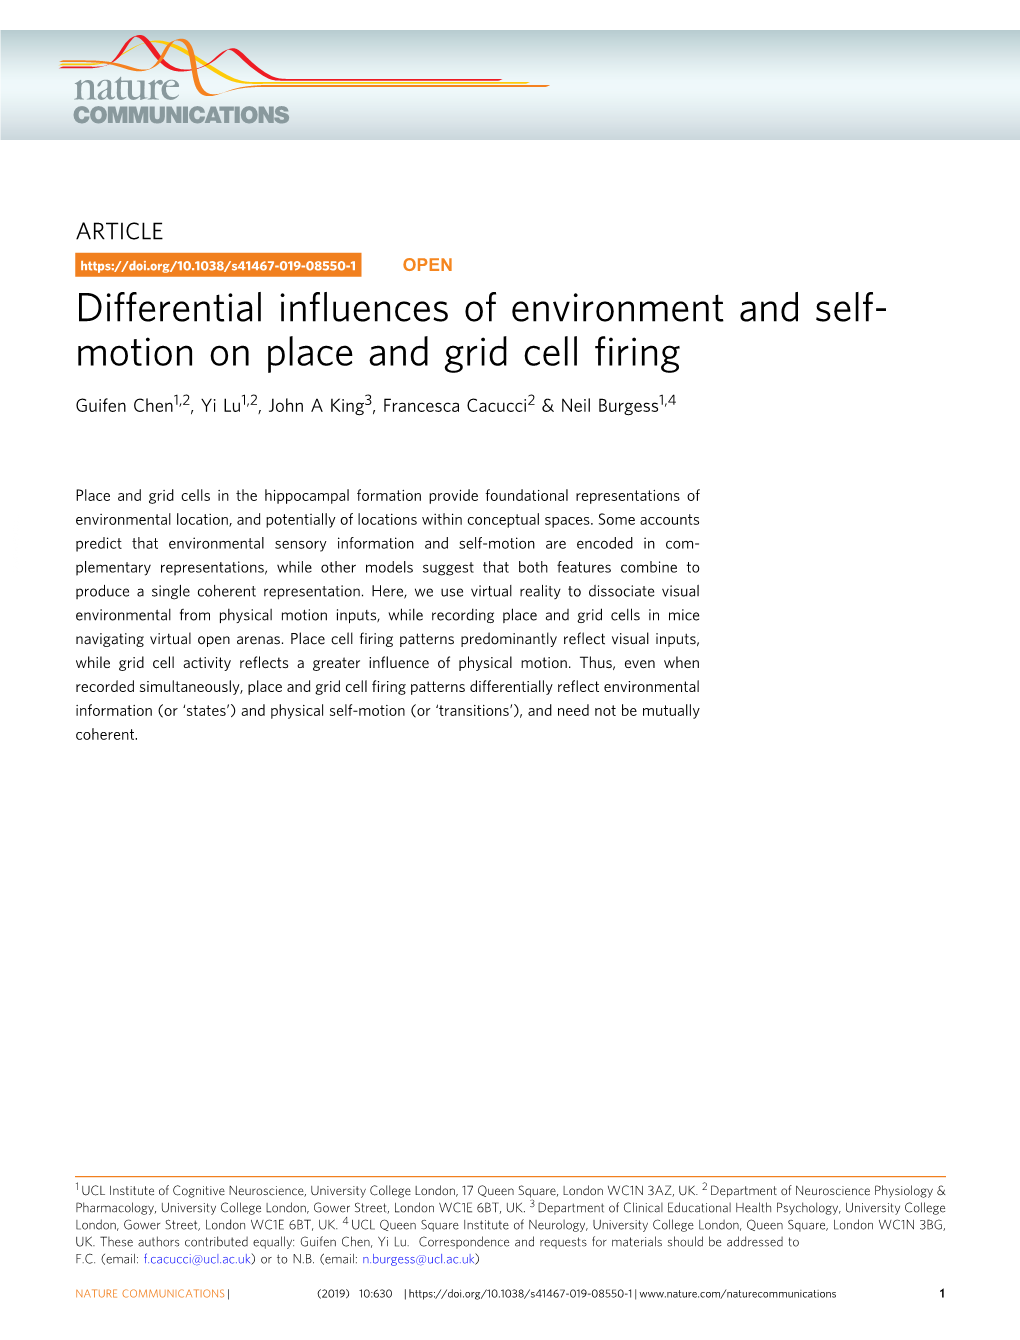 Differential Influences of Environment and Self-Motion on Place and Grid